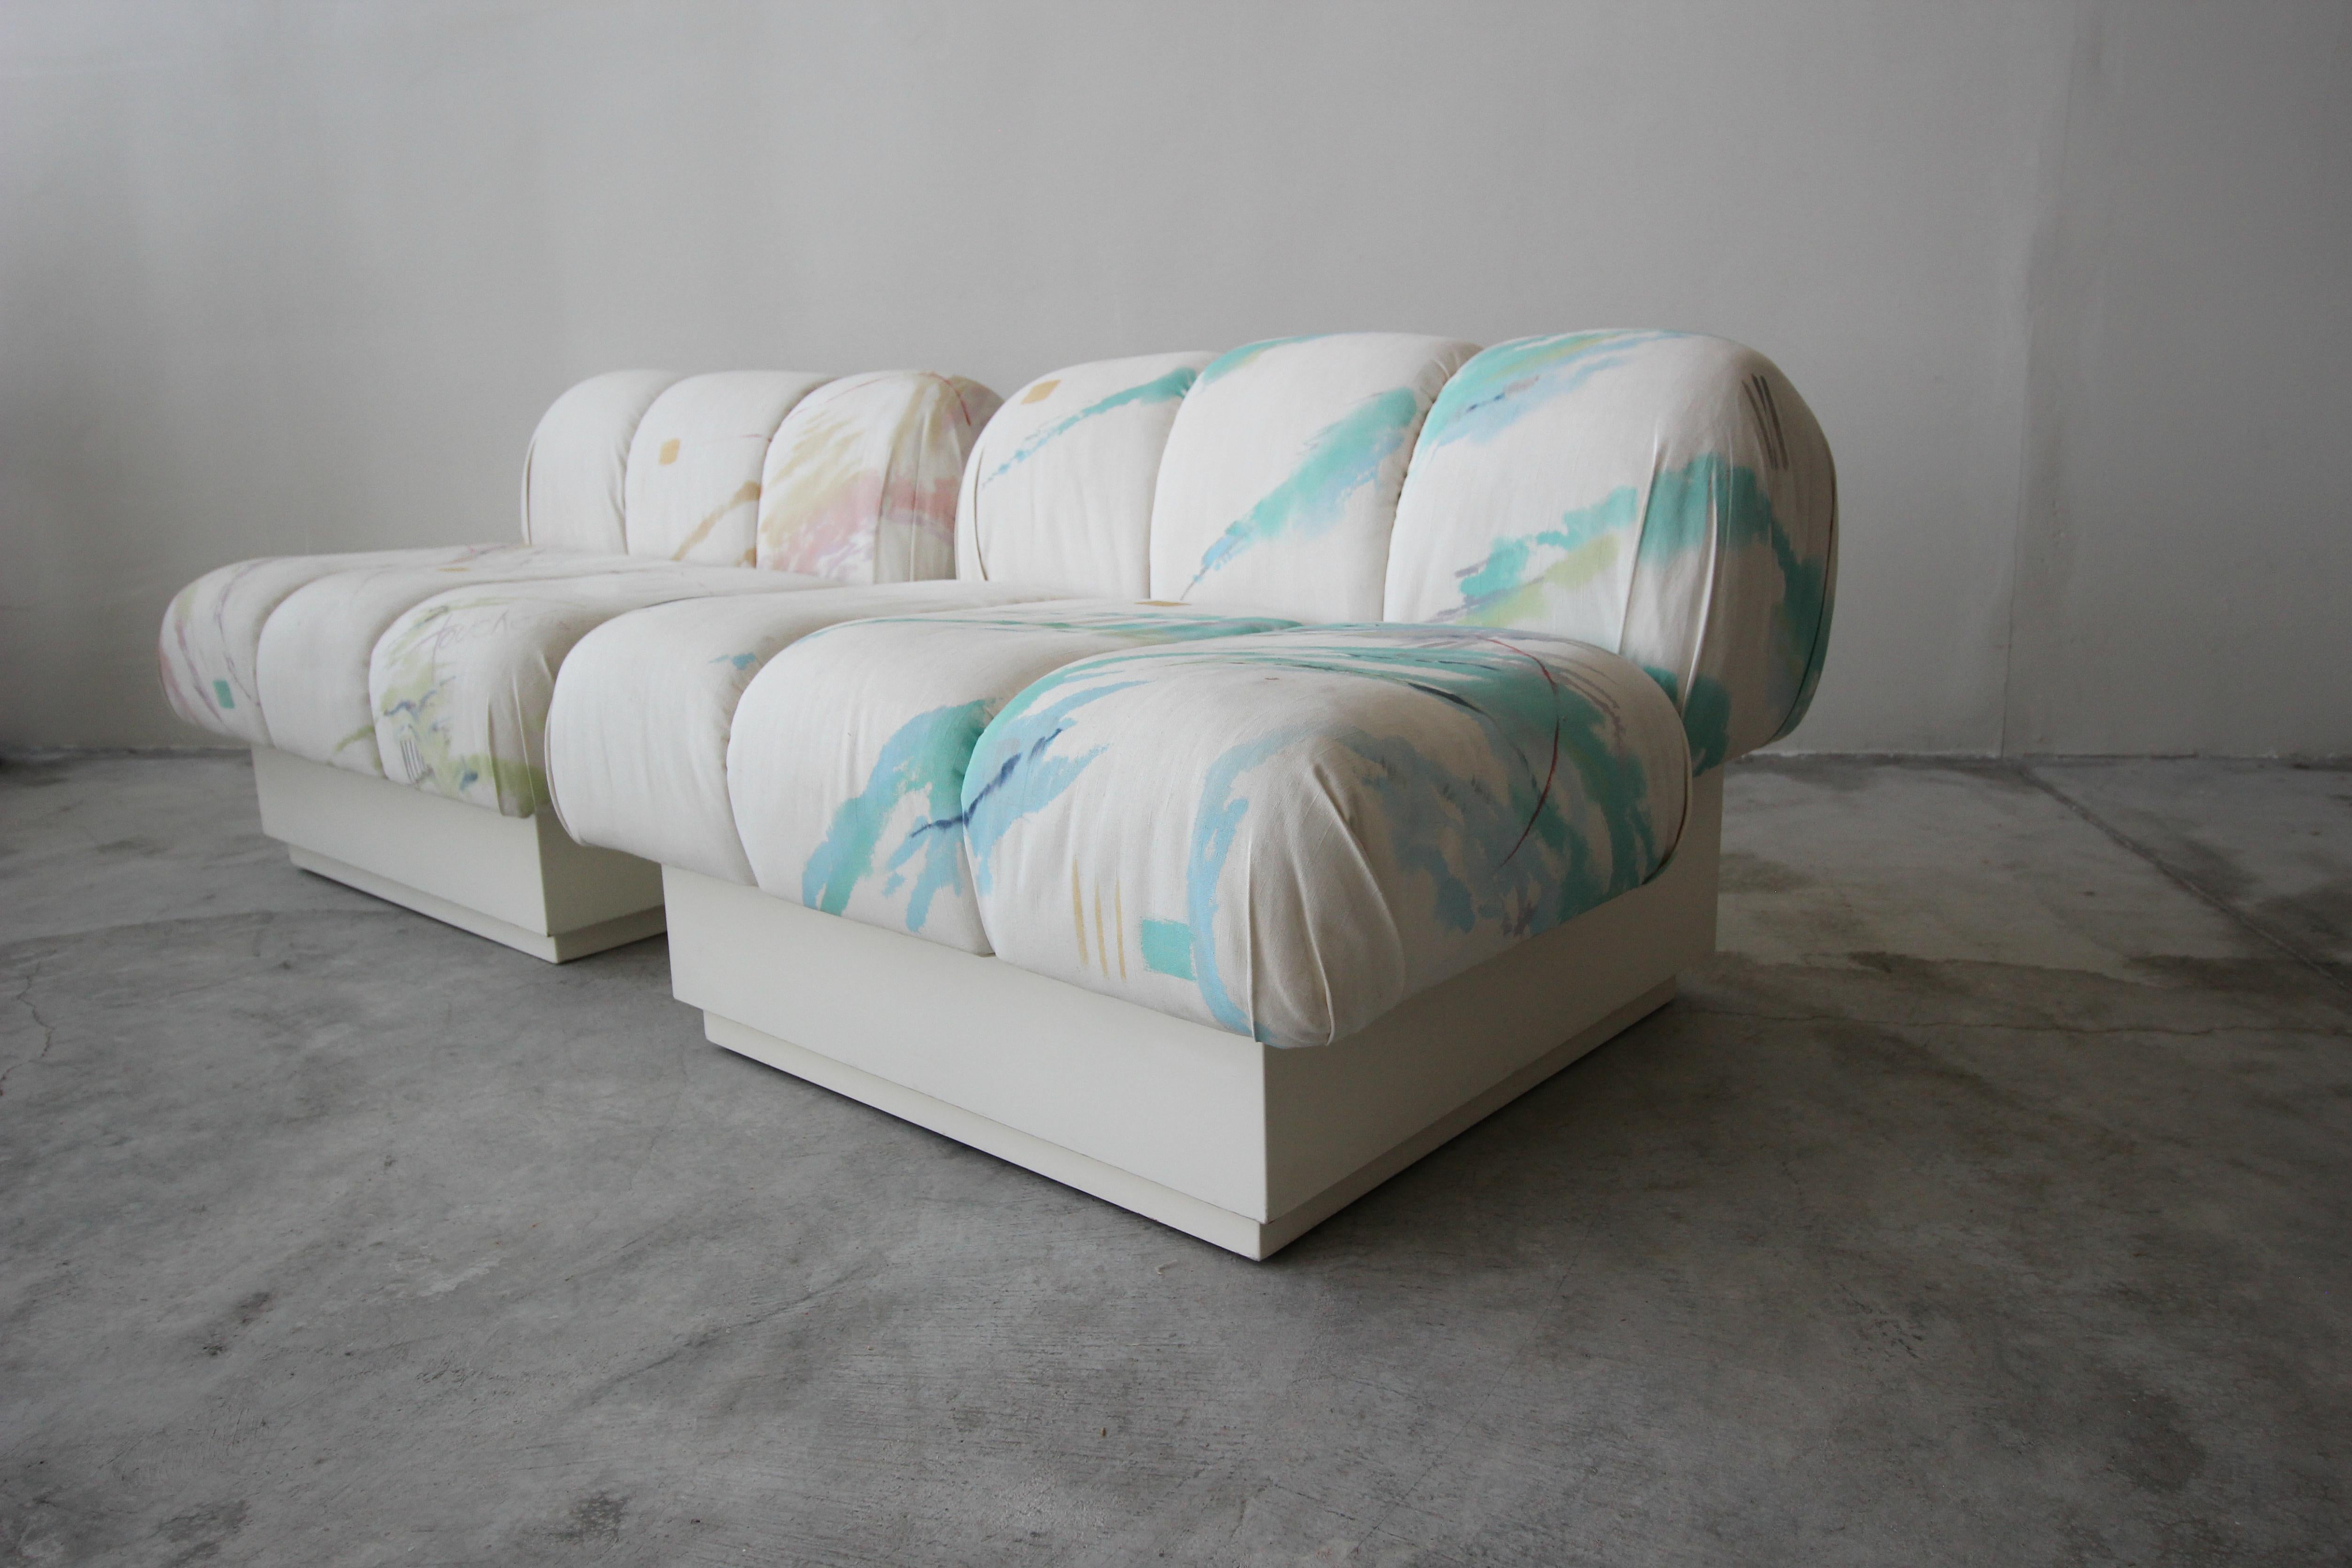 Incredible and large, Postmodern Italian style slipper chairs on a plinth bases. Most likely a custom pieces, these beauties truly have lines and curves worth coveting. 

Kept as found, in their pop art style, Touché, Artist-signed fabric. Chairs